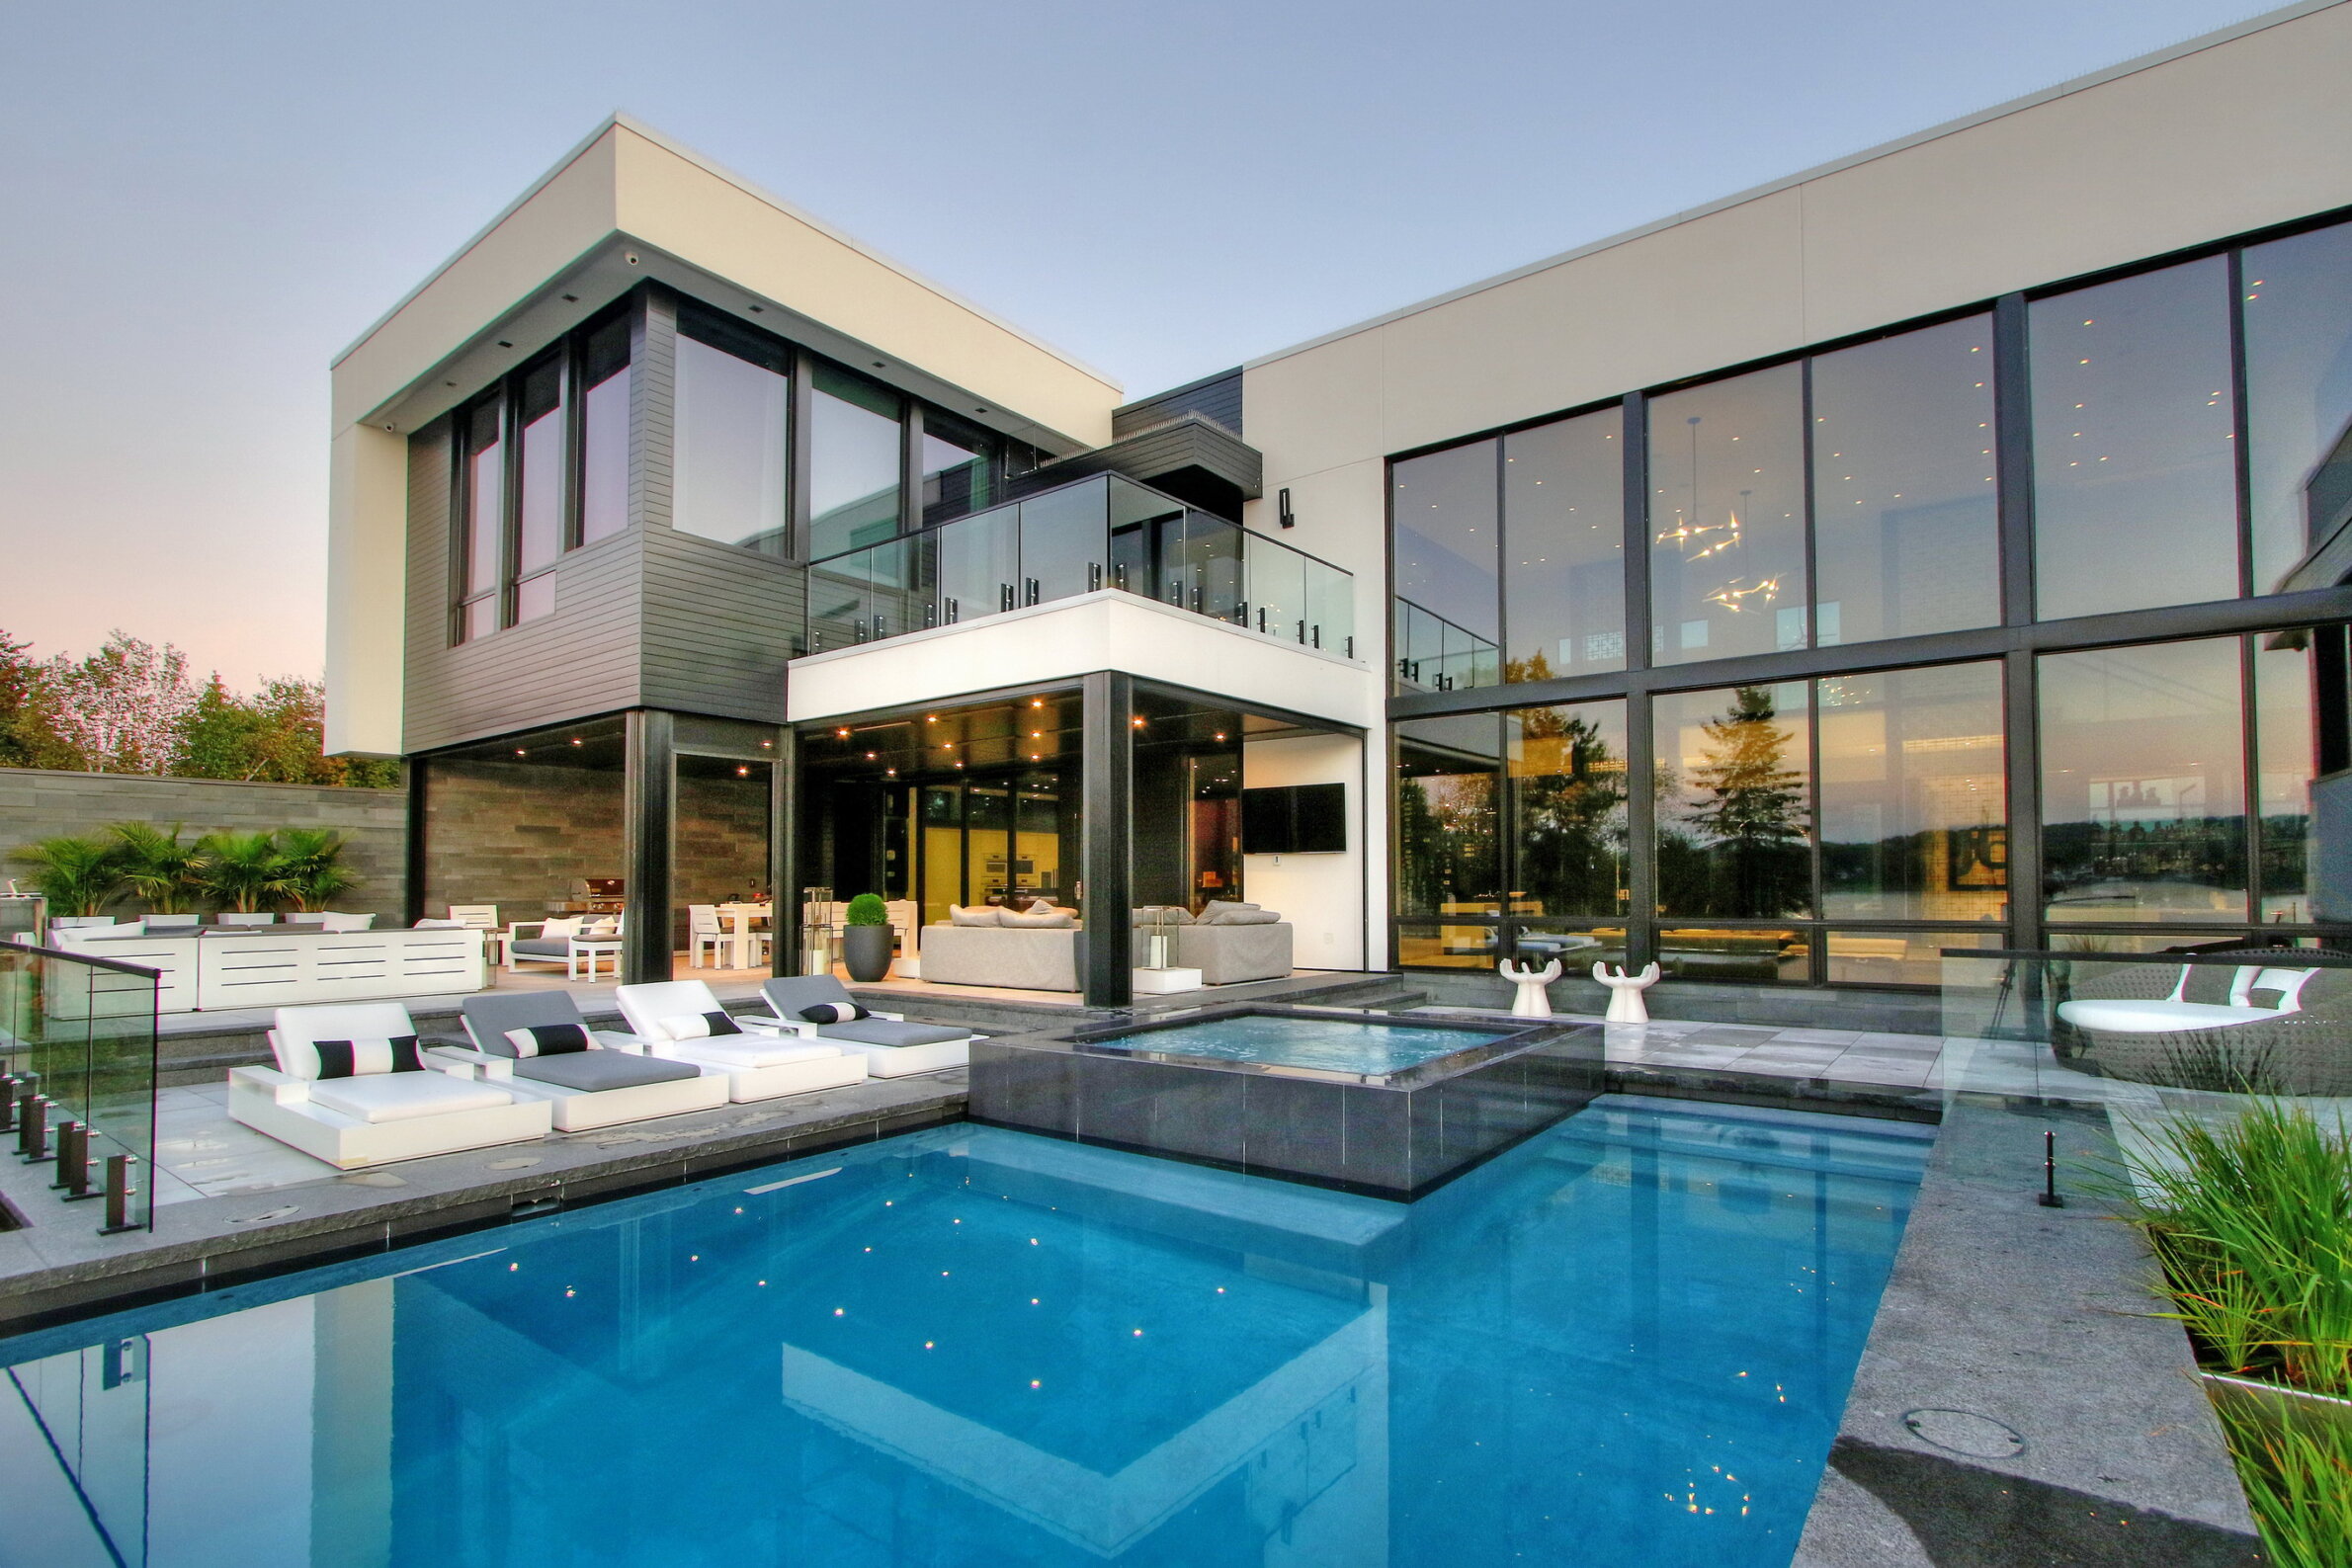 A modern two-story house with large windows, an outdoor pool, patio furniture, and a clear sky at dusk. Luxurious and sleek architecture.